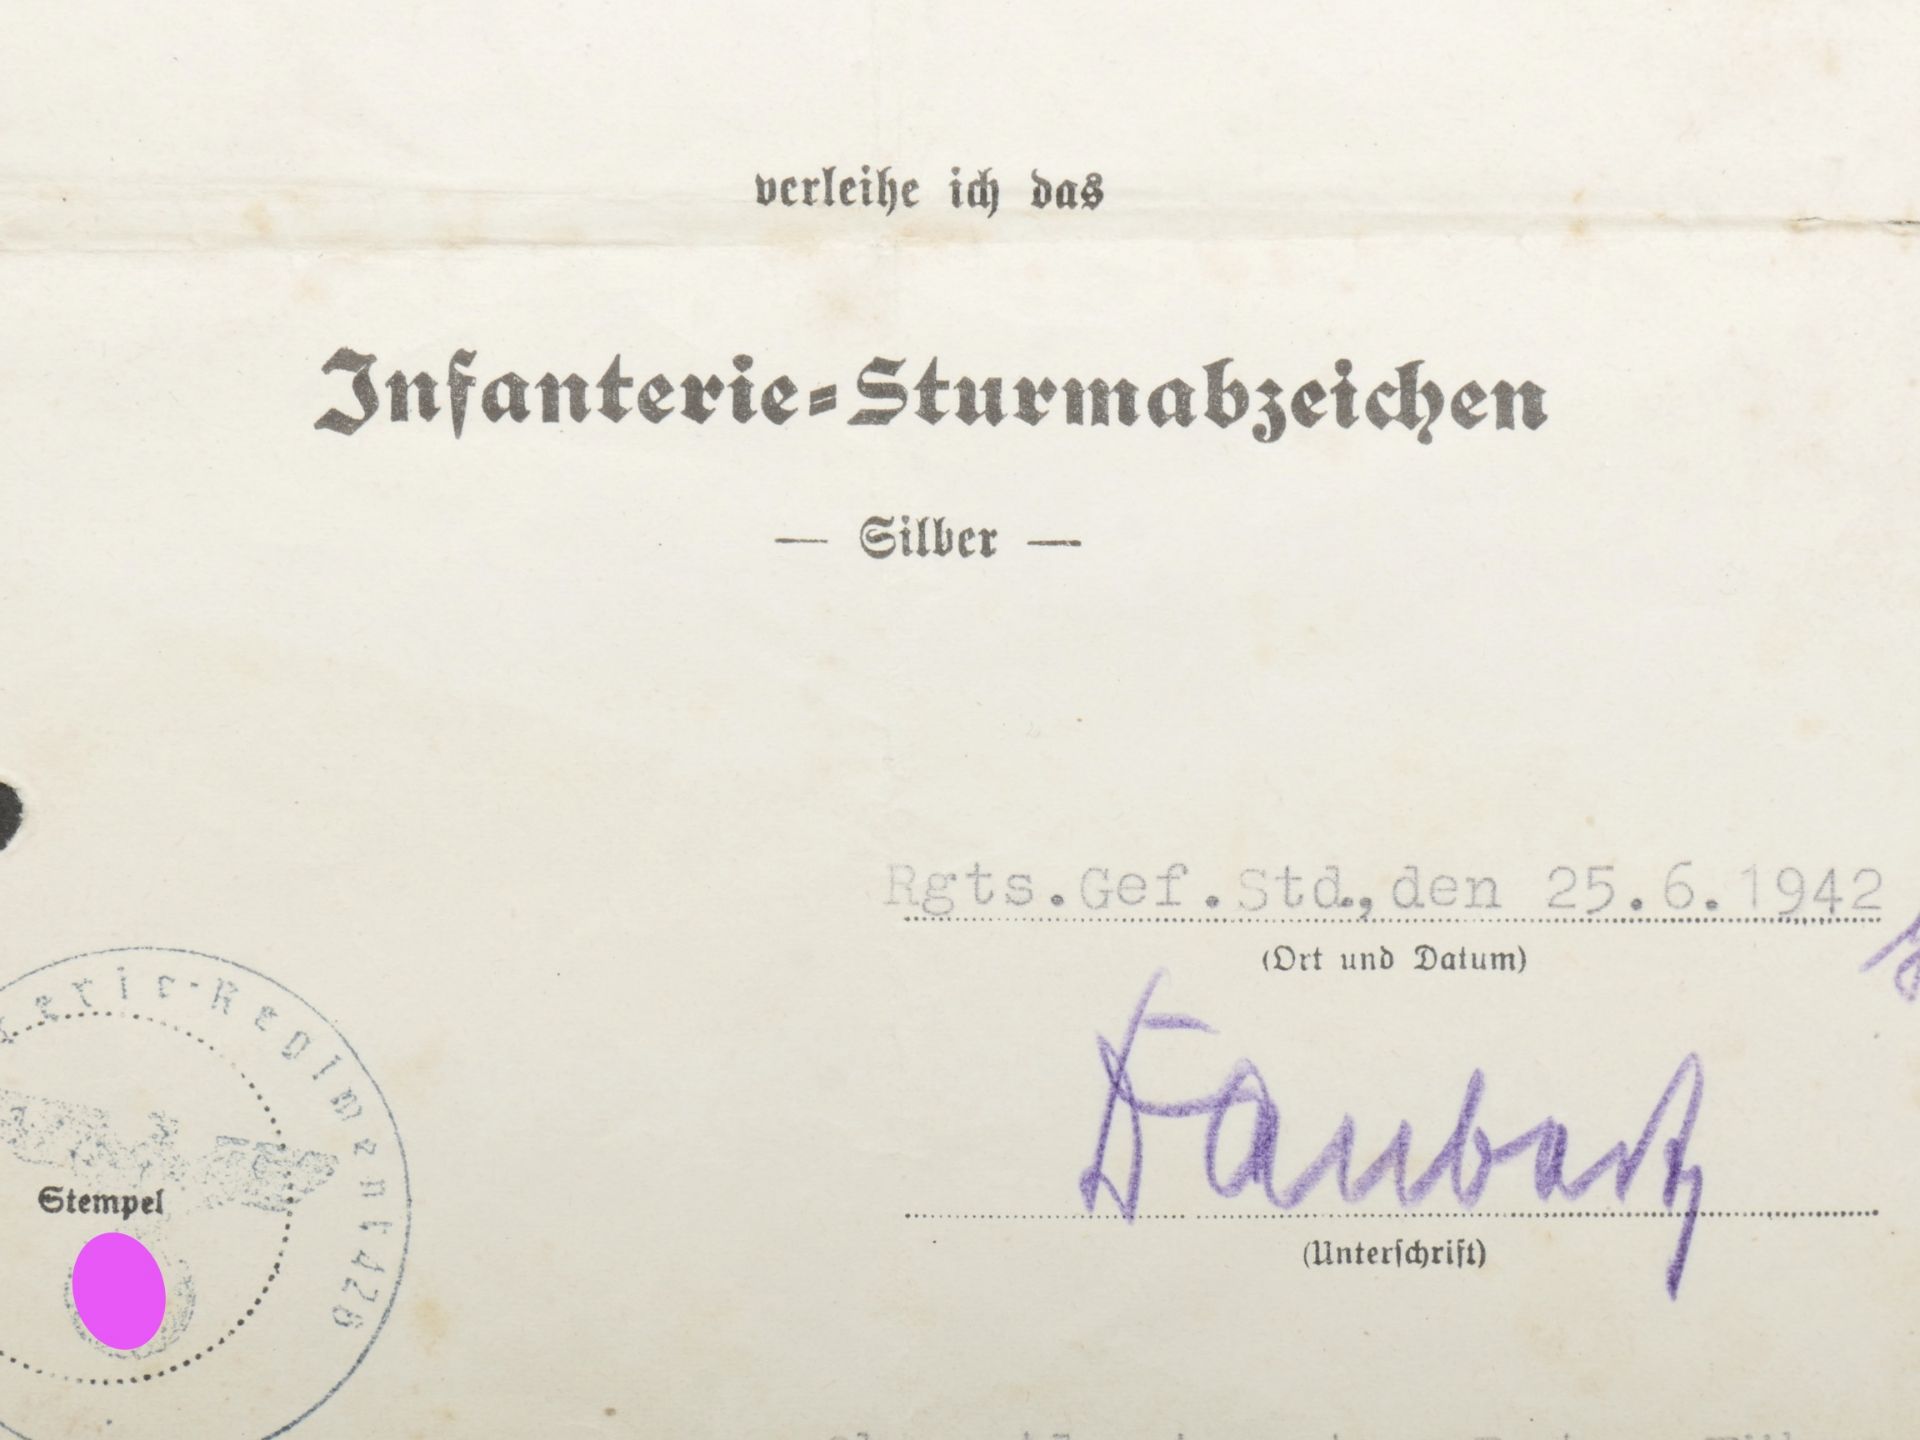 Diplome Infanterie Sturmabzeichen. Infanterie Sturmabzeichen diploma. - Image 4 of 5